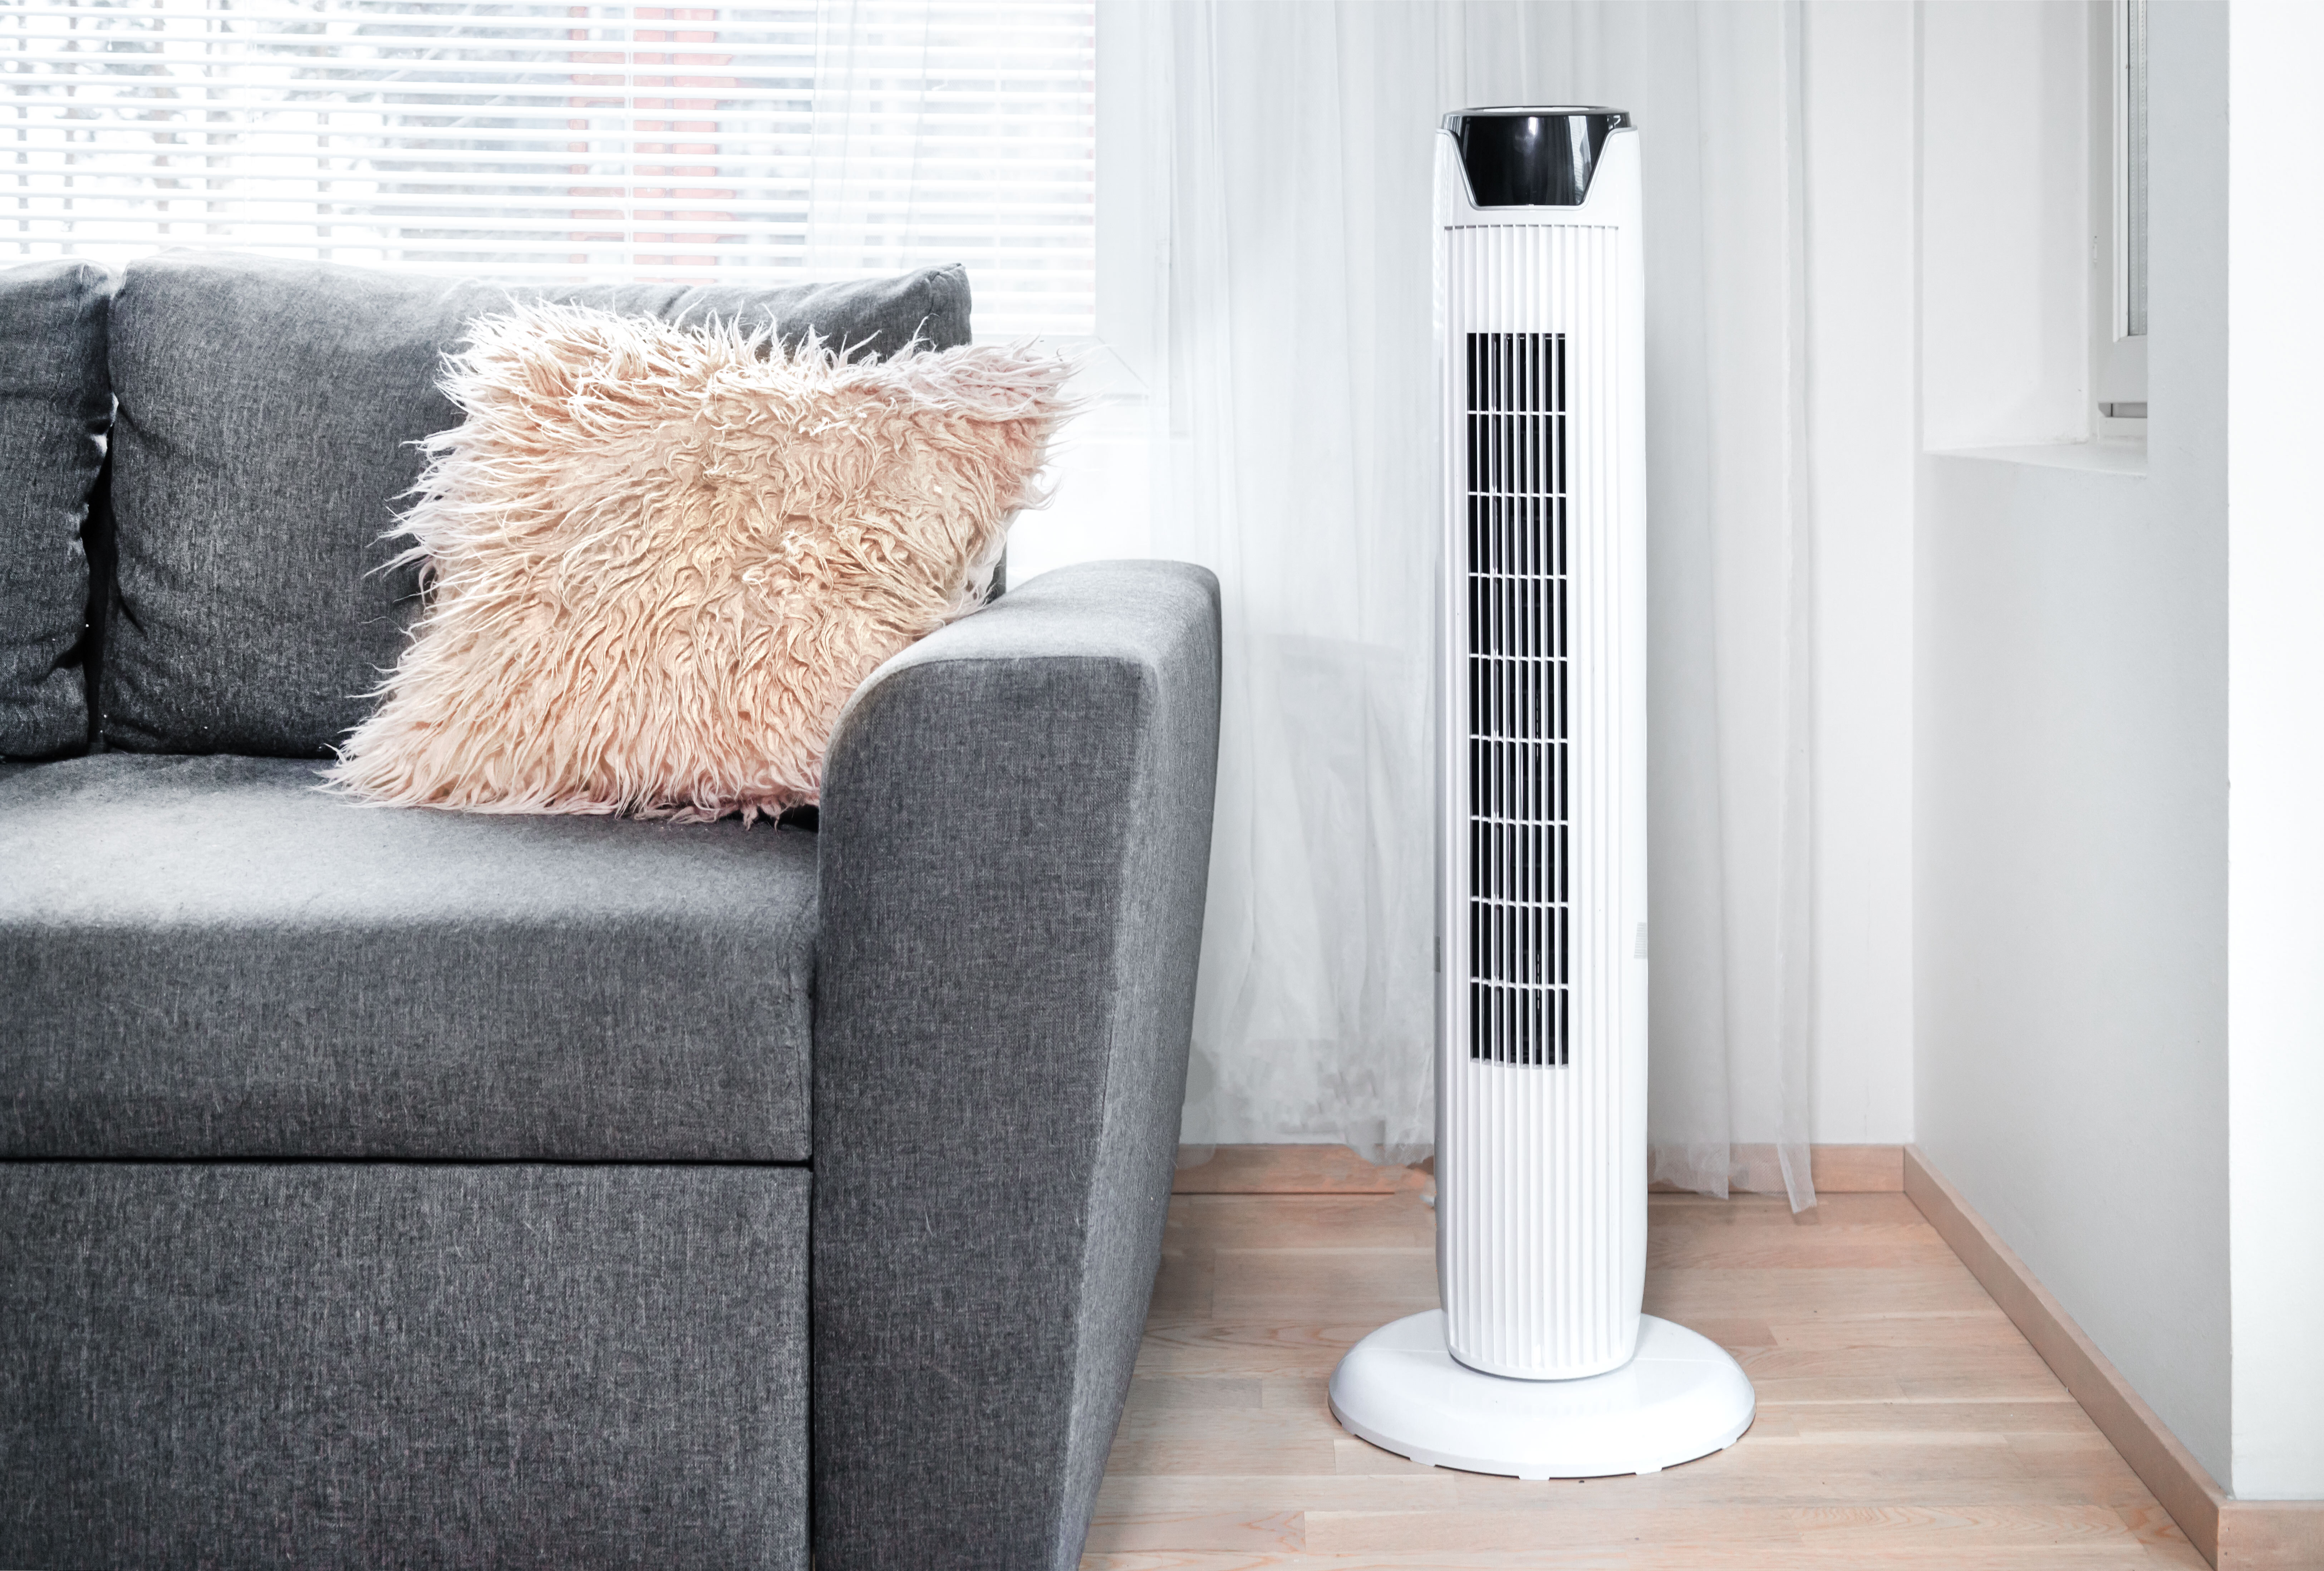 Tower fan on the living room floor next to a sofa